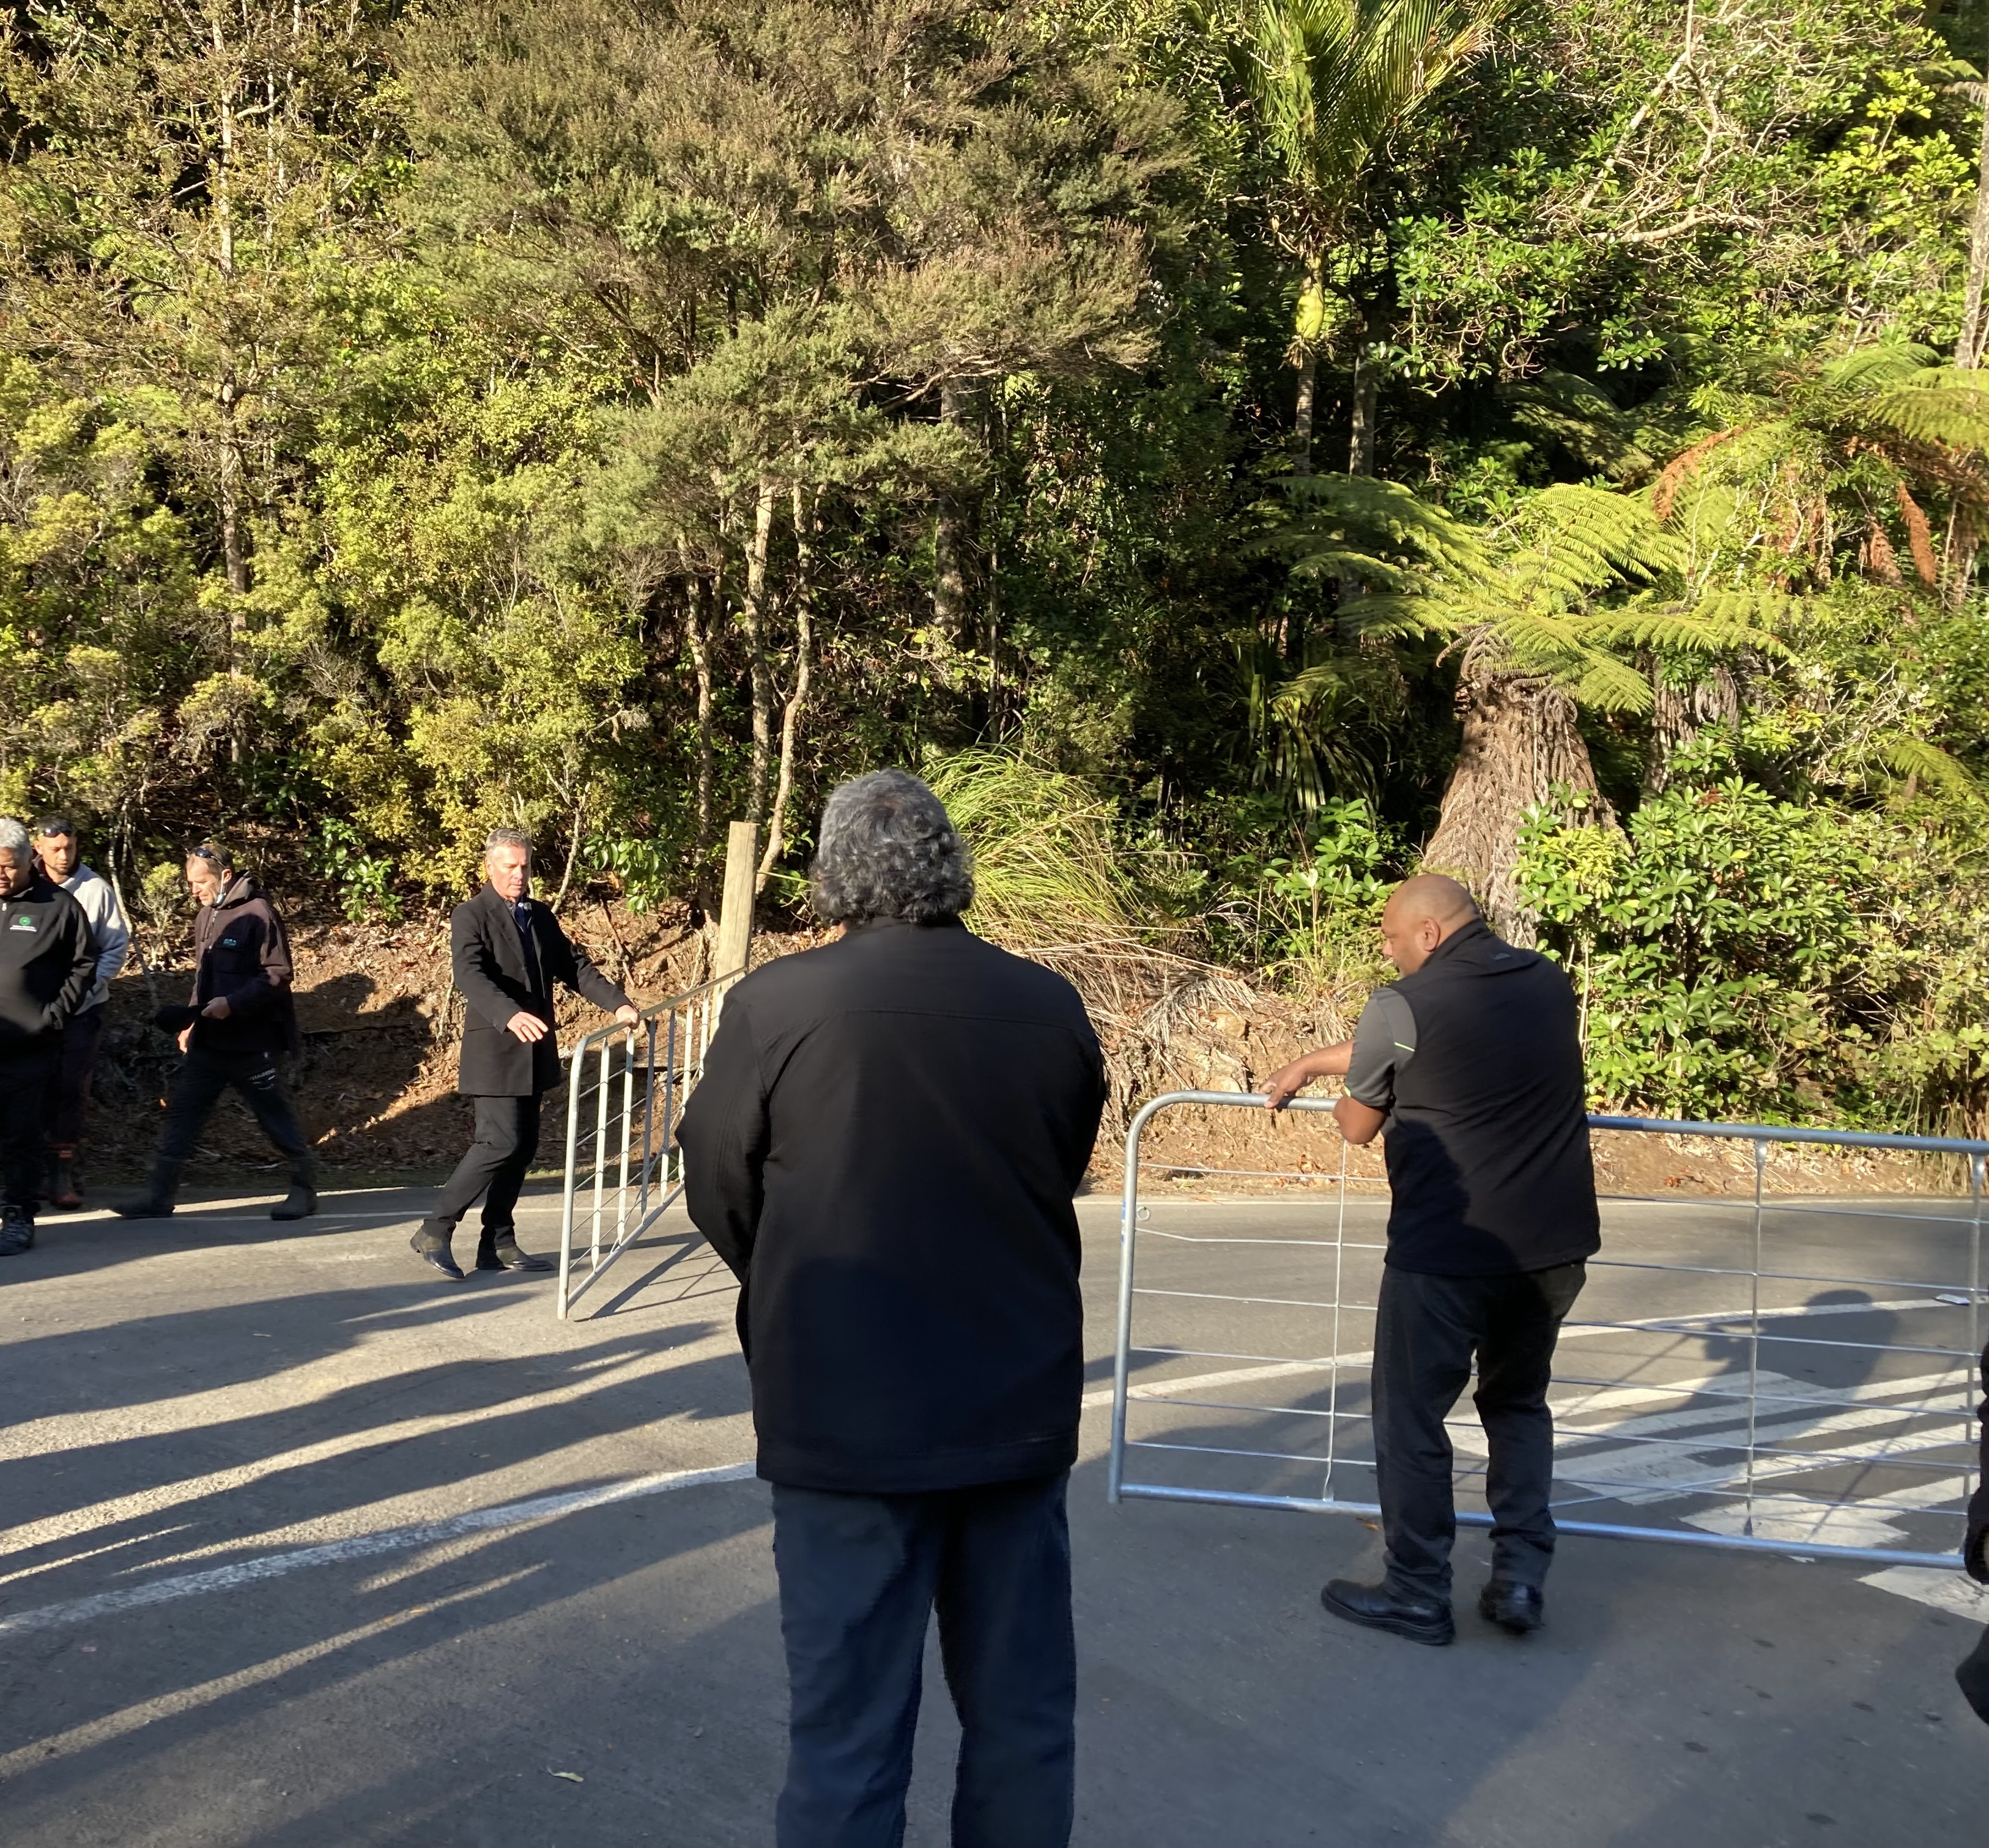 Thomas Hohaia, Chair of Te Roroa Whatu Ora and Manawhenua Trusts, with Dr Jason Smith, Mayor of Kaipara District Council opened the gates to allow the first cars through.